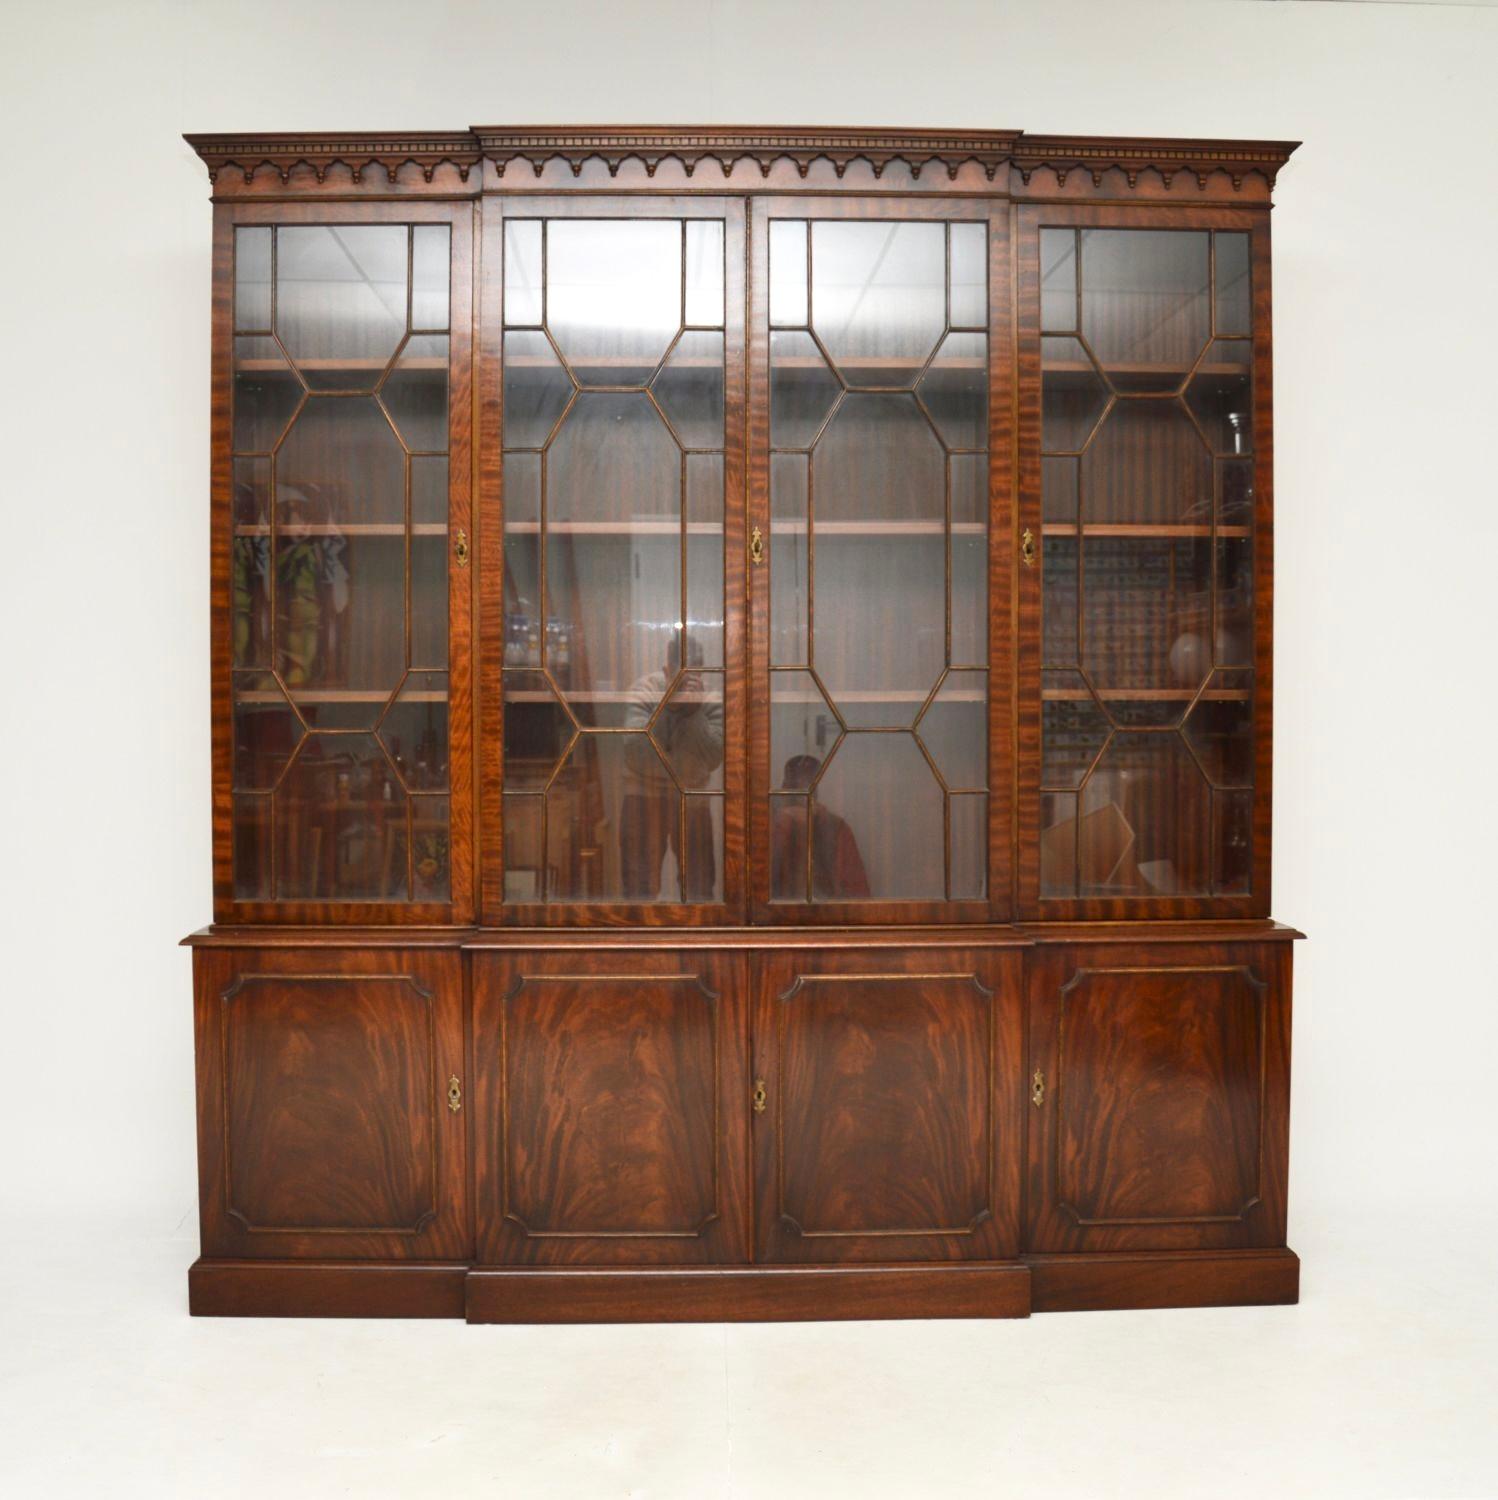 A large and impressive antique Georgian style breakfront bookcase. This was made in England, it dates from around the 1930-1950’s.

It is of superb quality, with fantastic proportions and lots of storage space. It sits on a plinth base with four